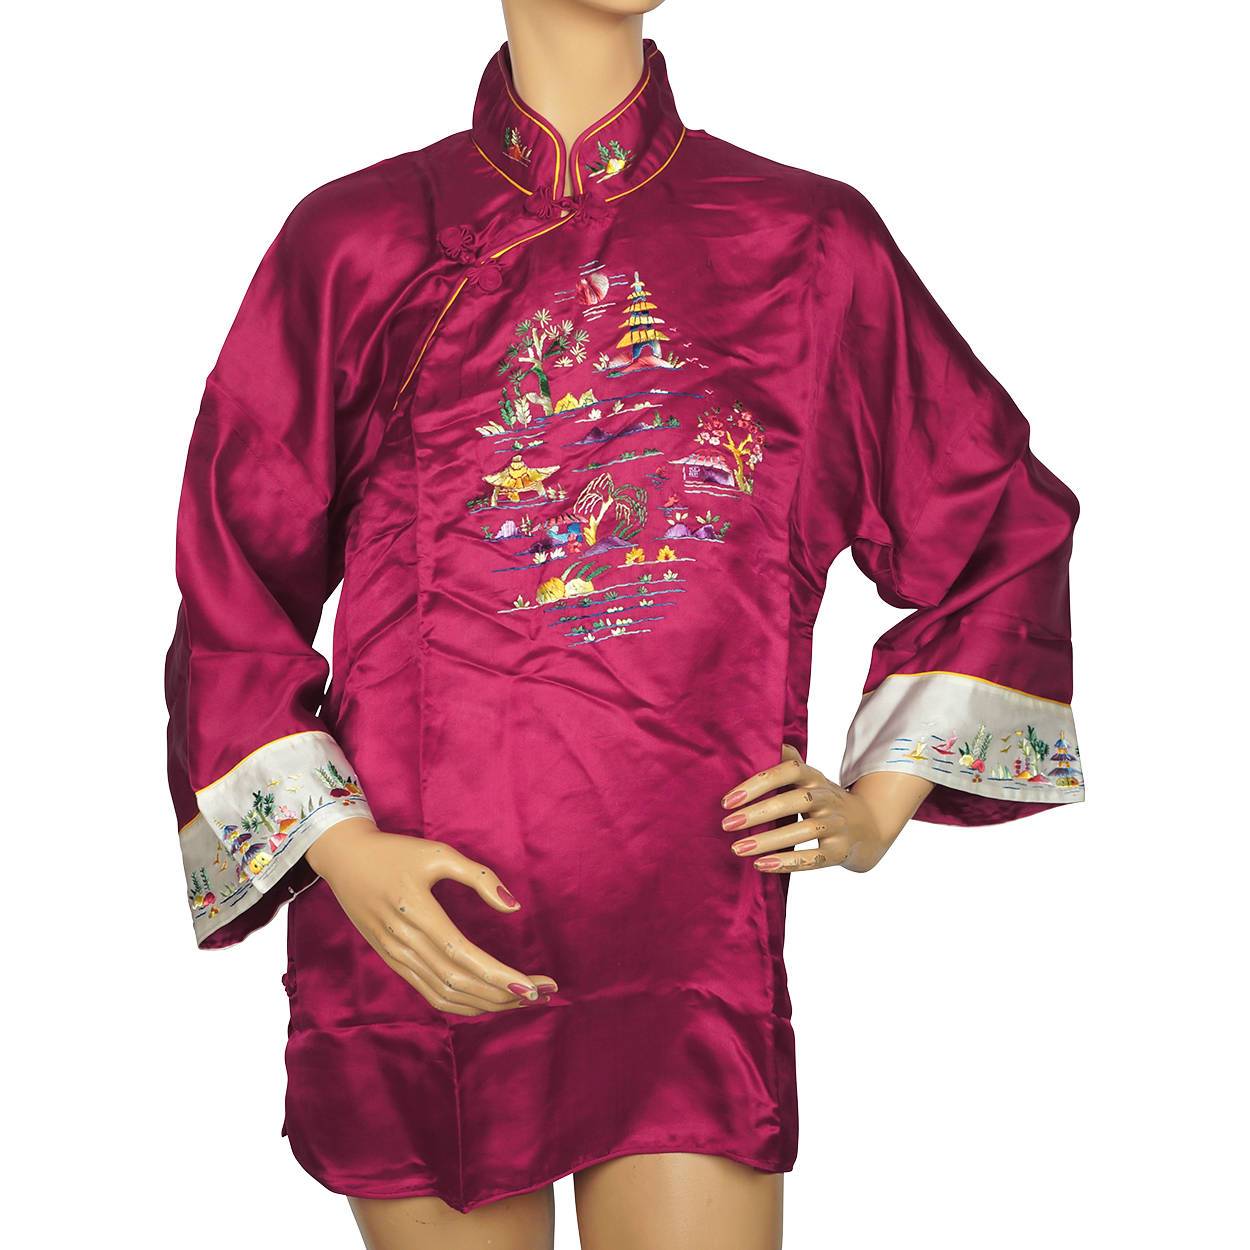 Vintage NOS Chinese Cheongsam Shirt Blouse Top Embroidered Magenta 